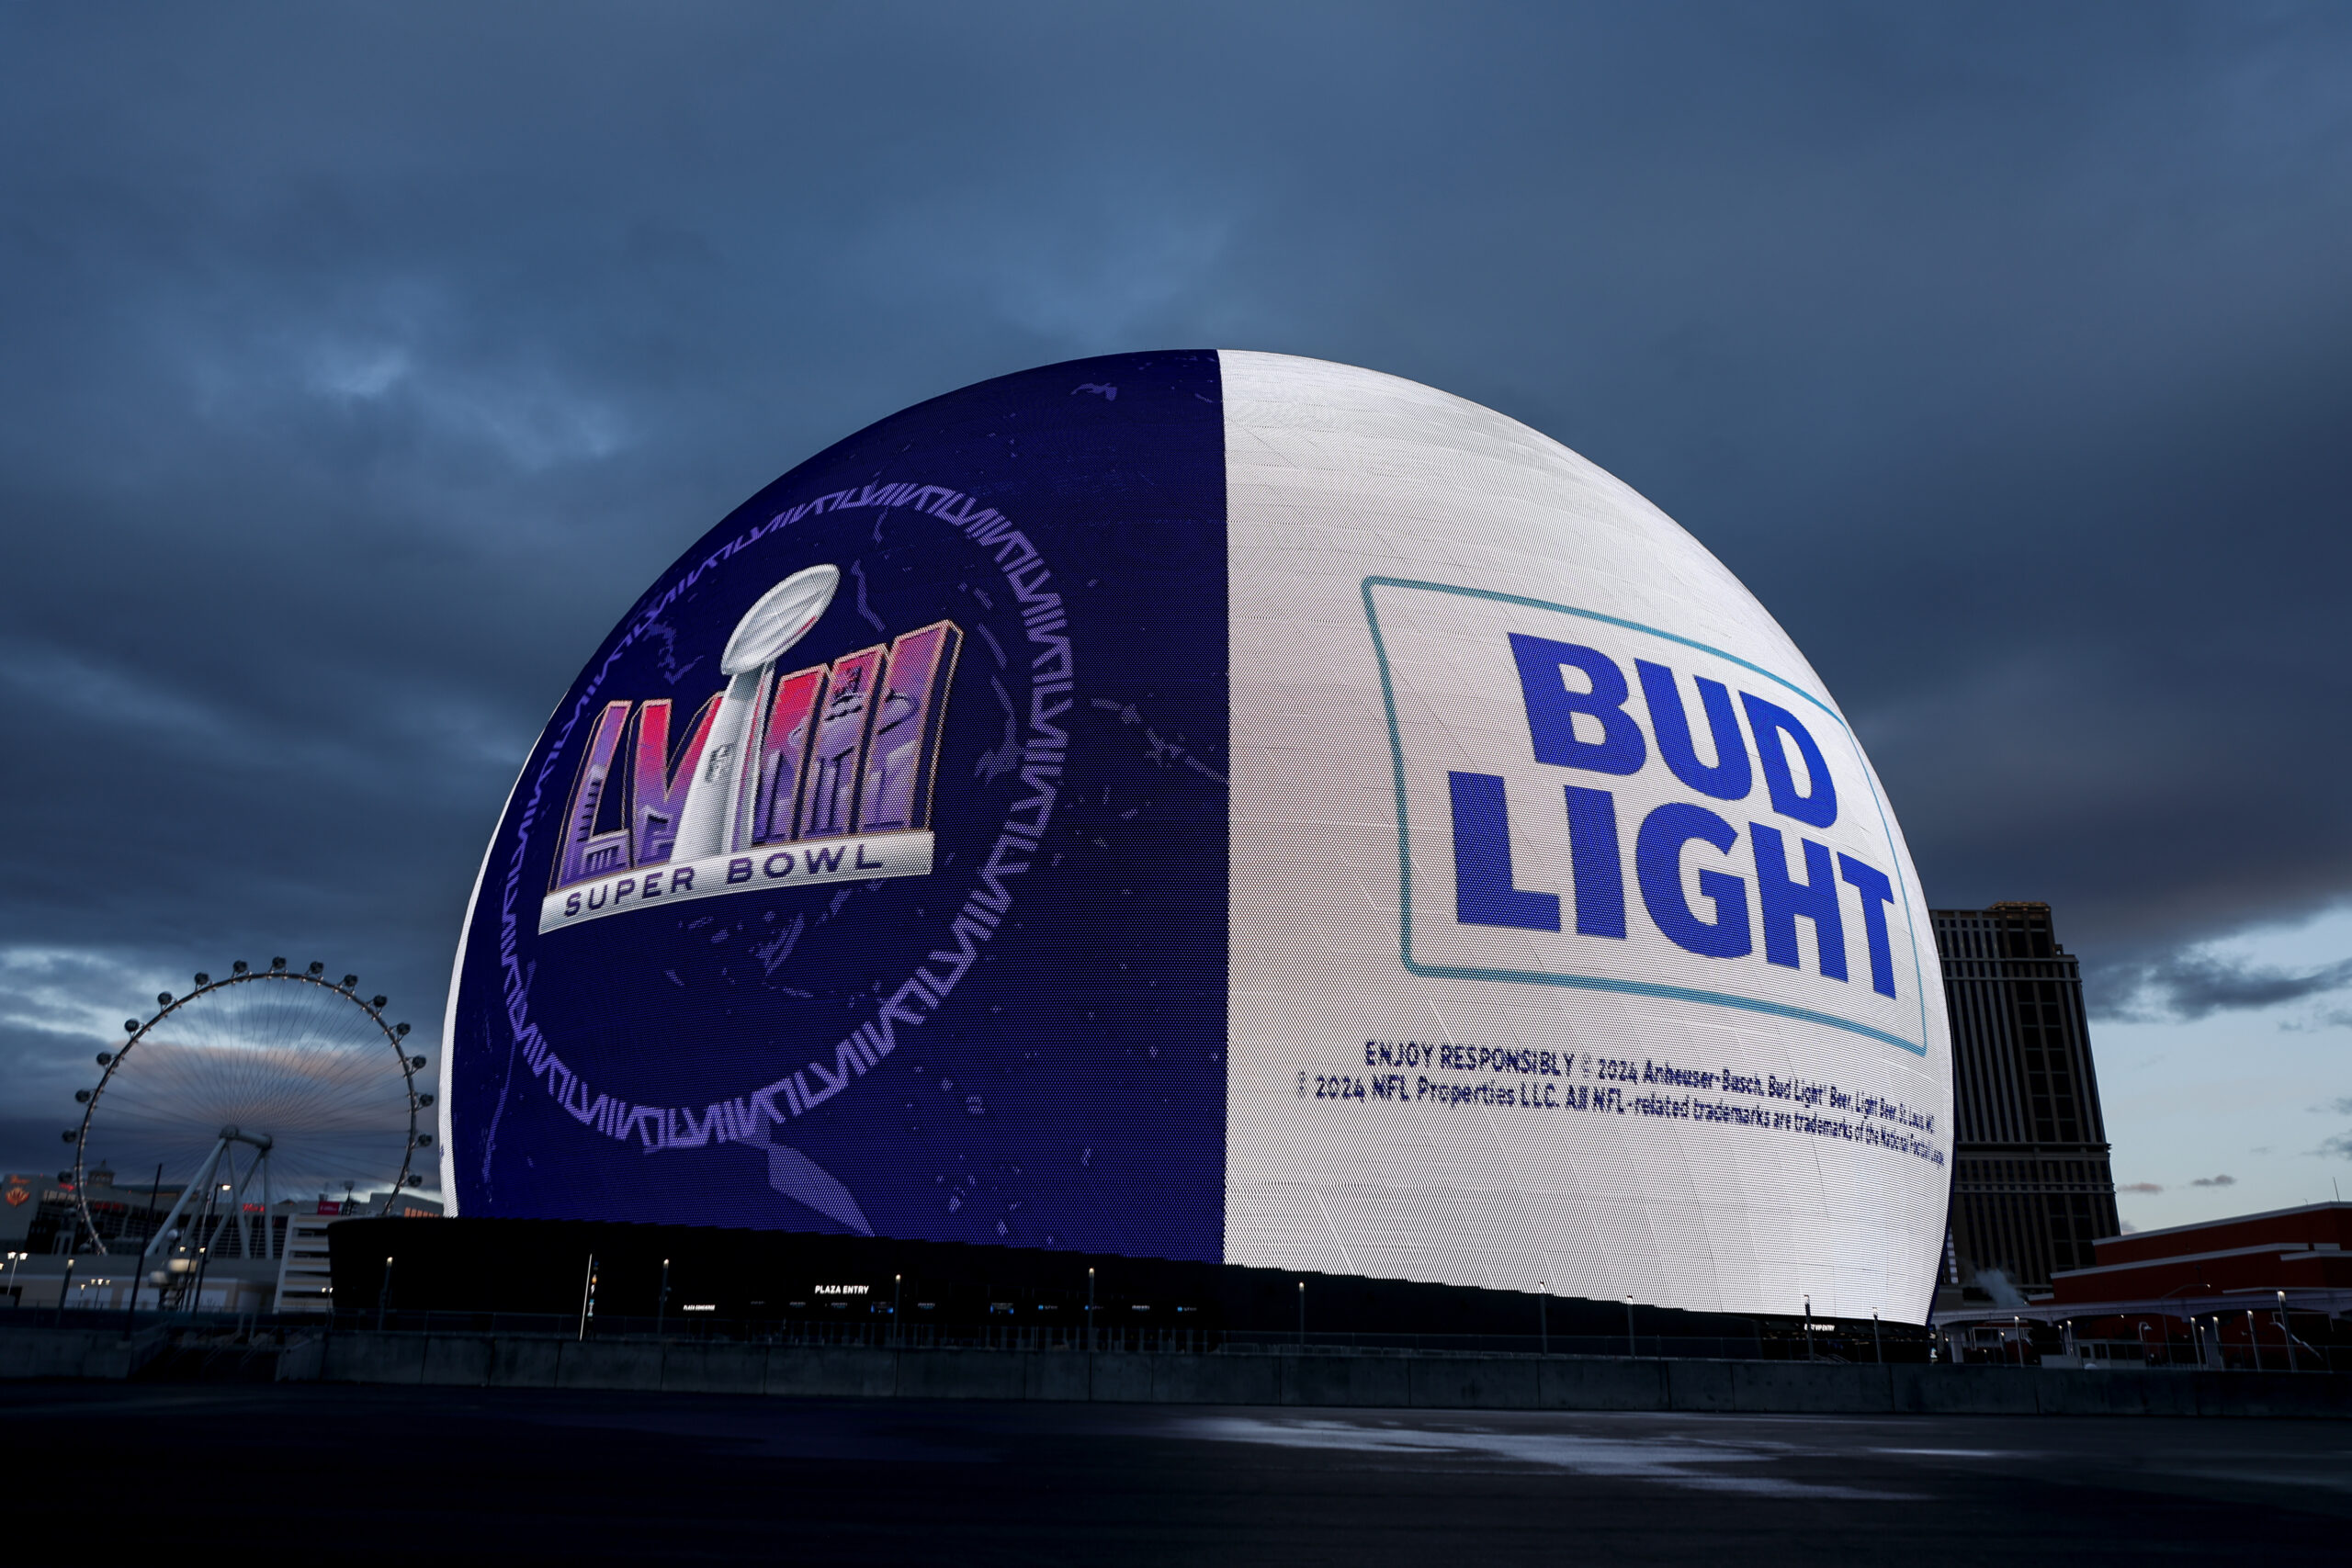 Bud Light lost big in the Super Bowl and beyond